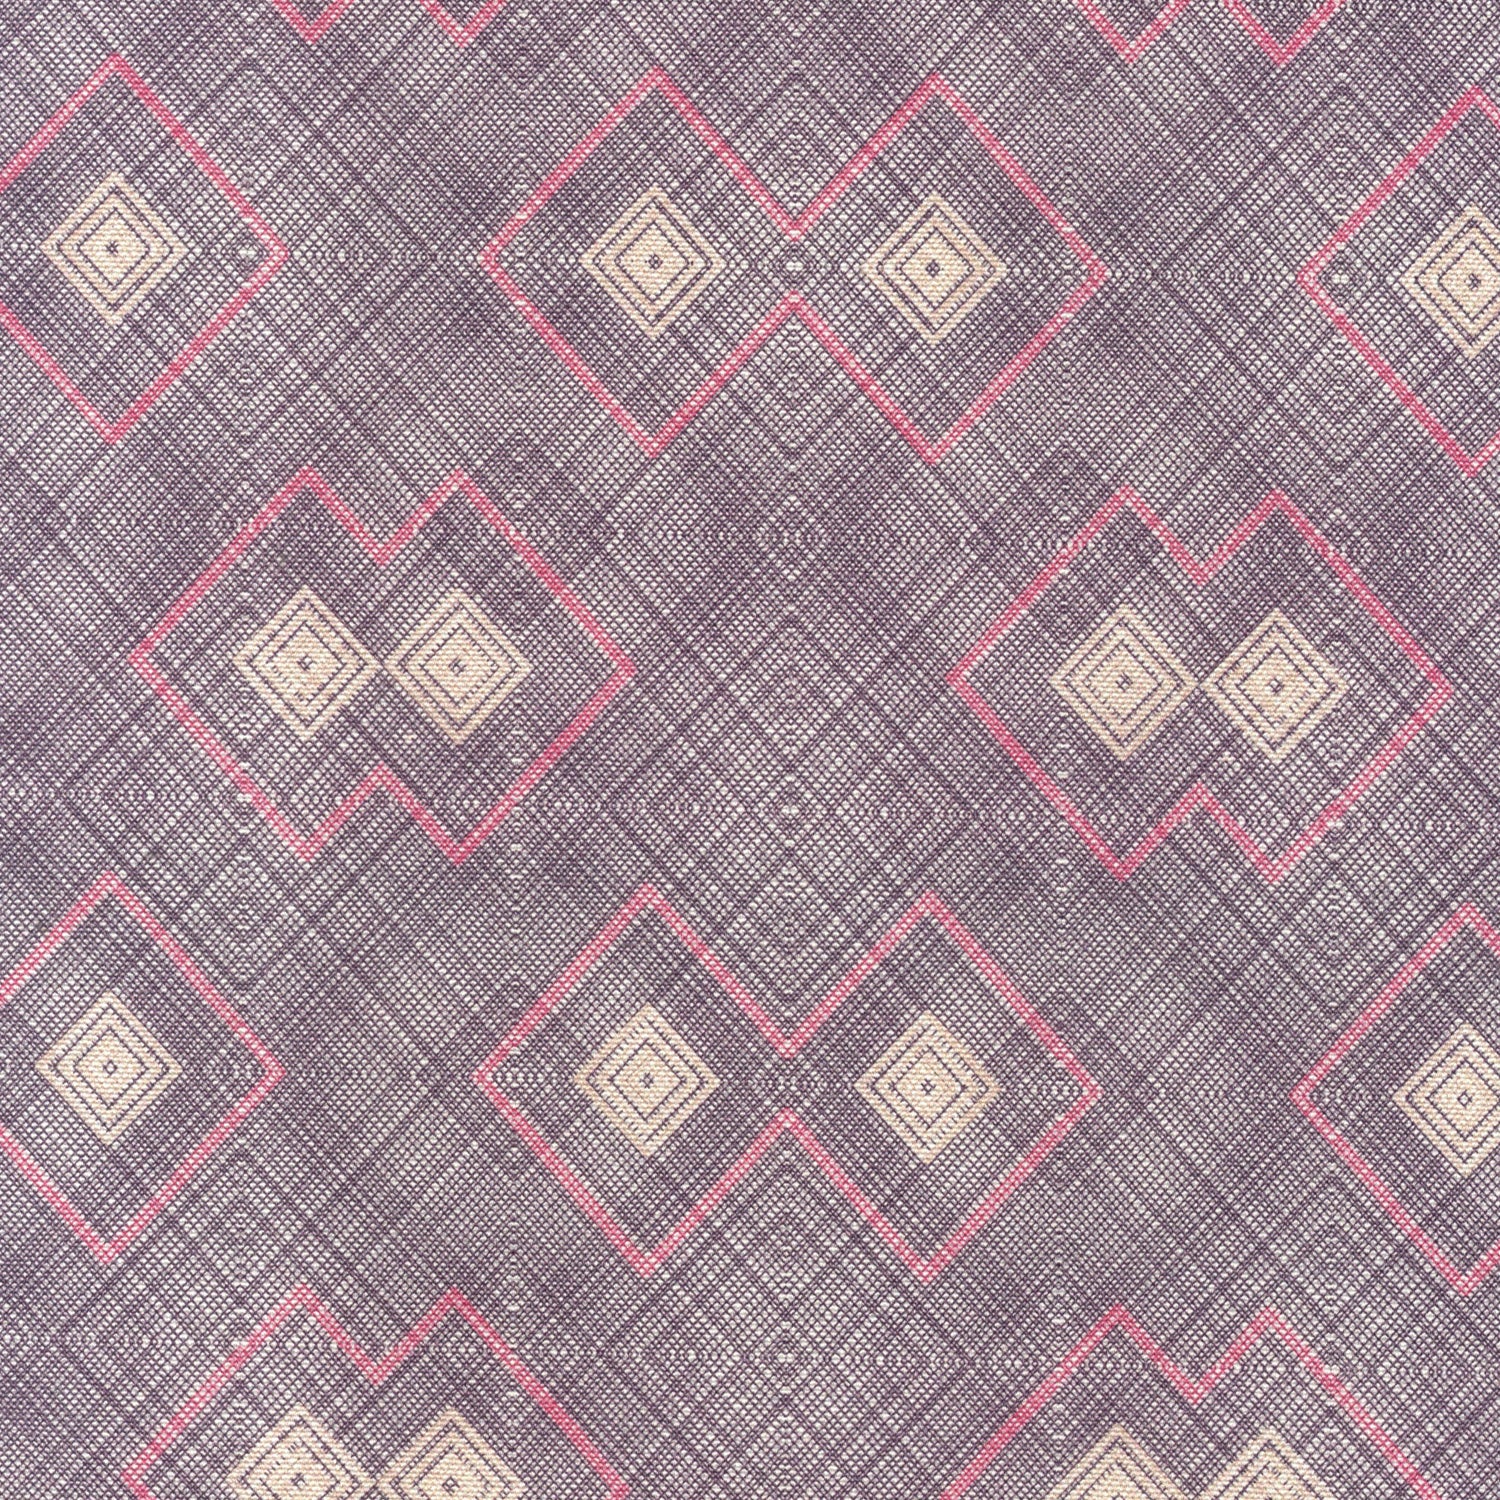 Detail of fabric in a detailed diamond lattice print in shades of pink and tan on a purple field.